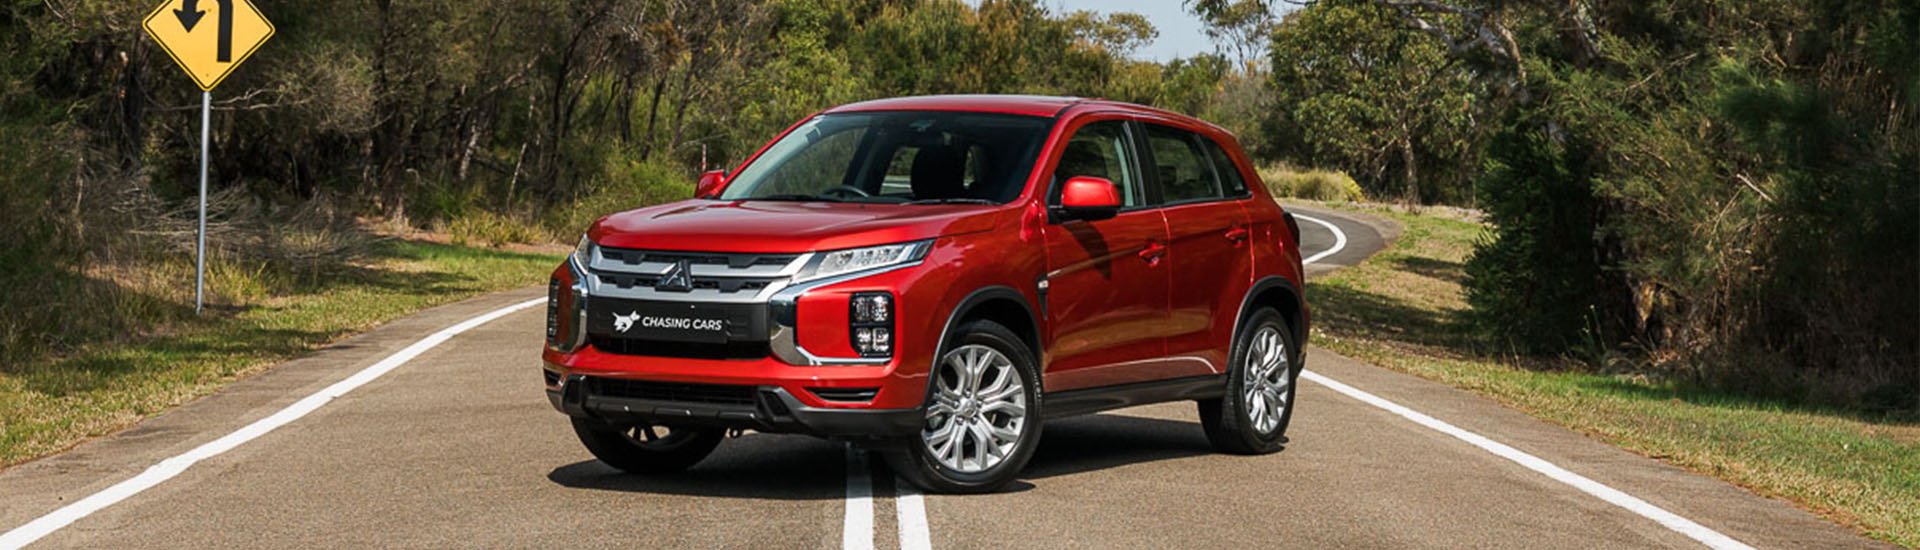 2024 Mitsubishi ASX pricing and features